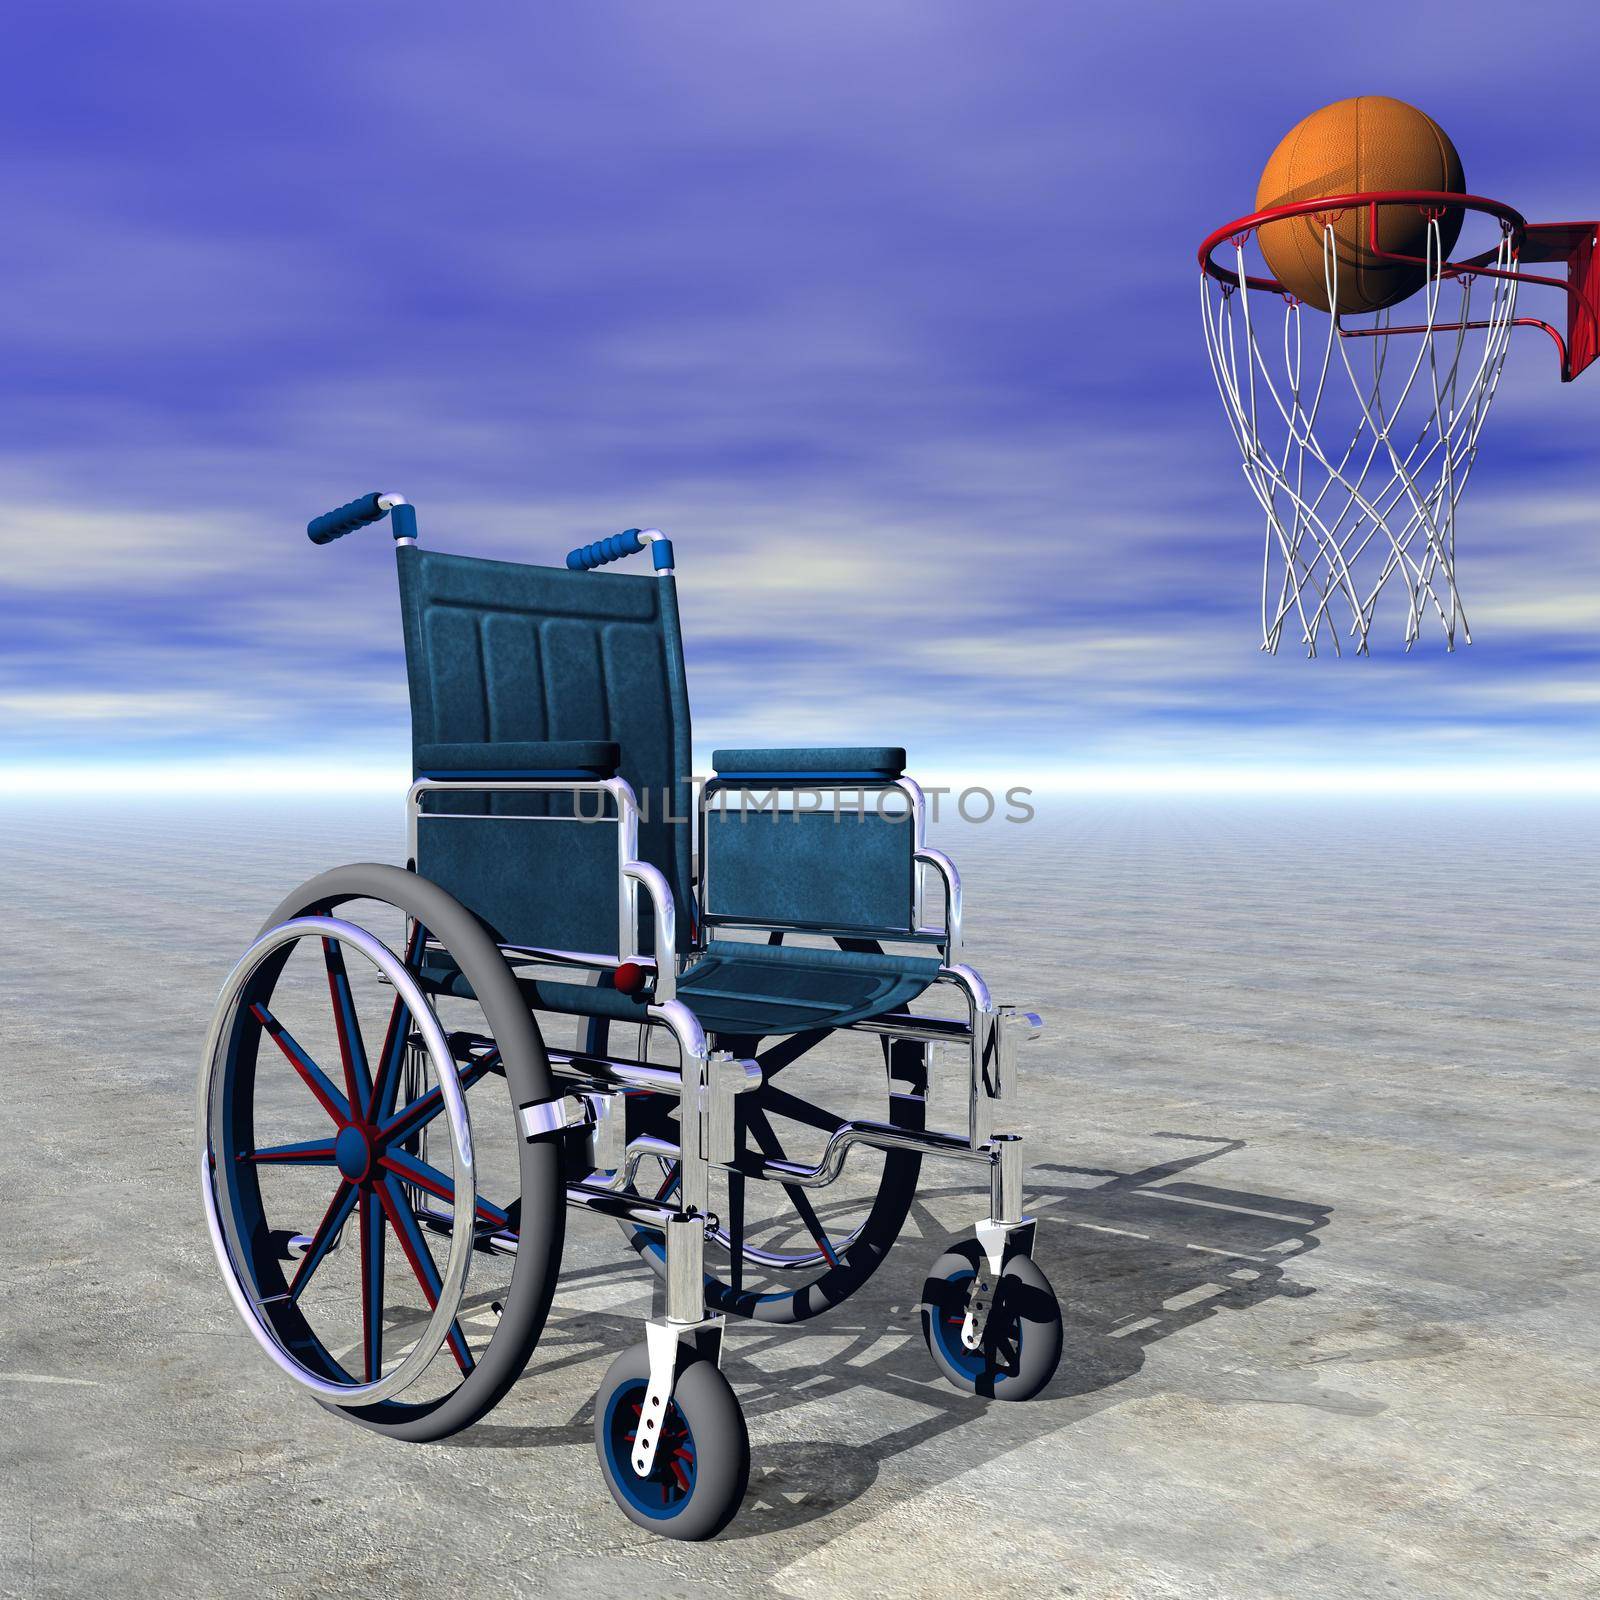 Wheelchair next to basketball for handicapped sport